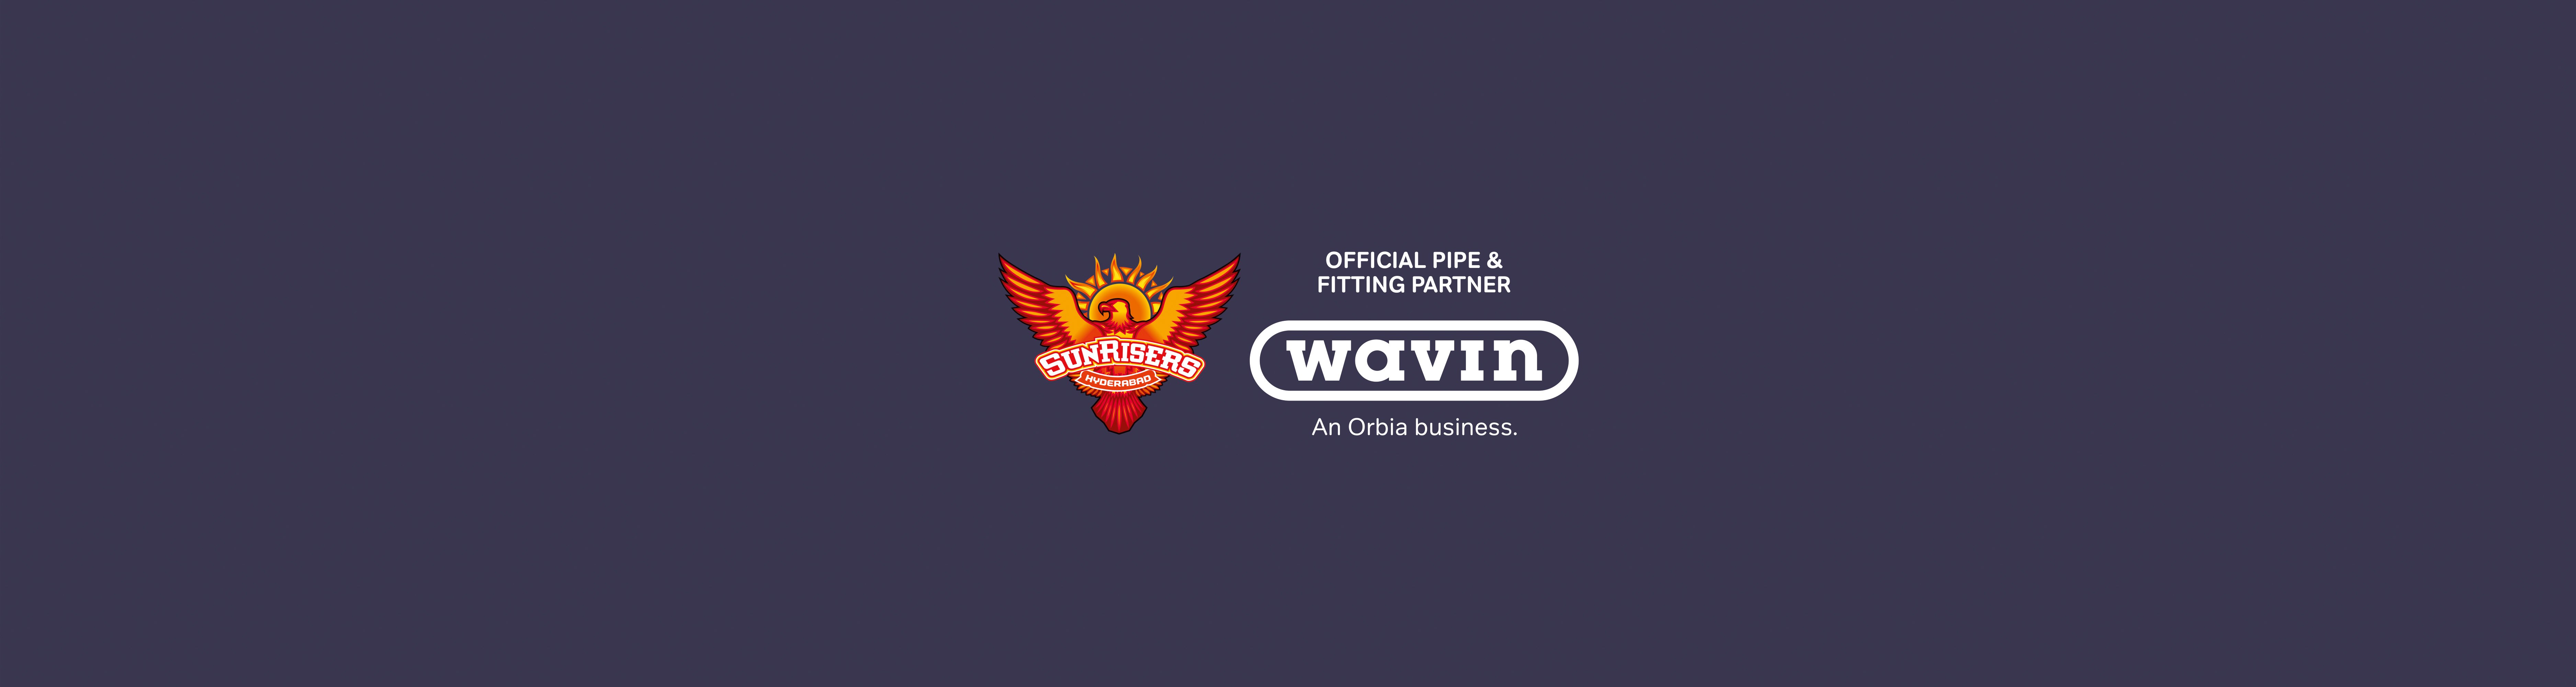 Wavin is Official Pipes & Fittings Partner of Sunrisers Hyderabad